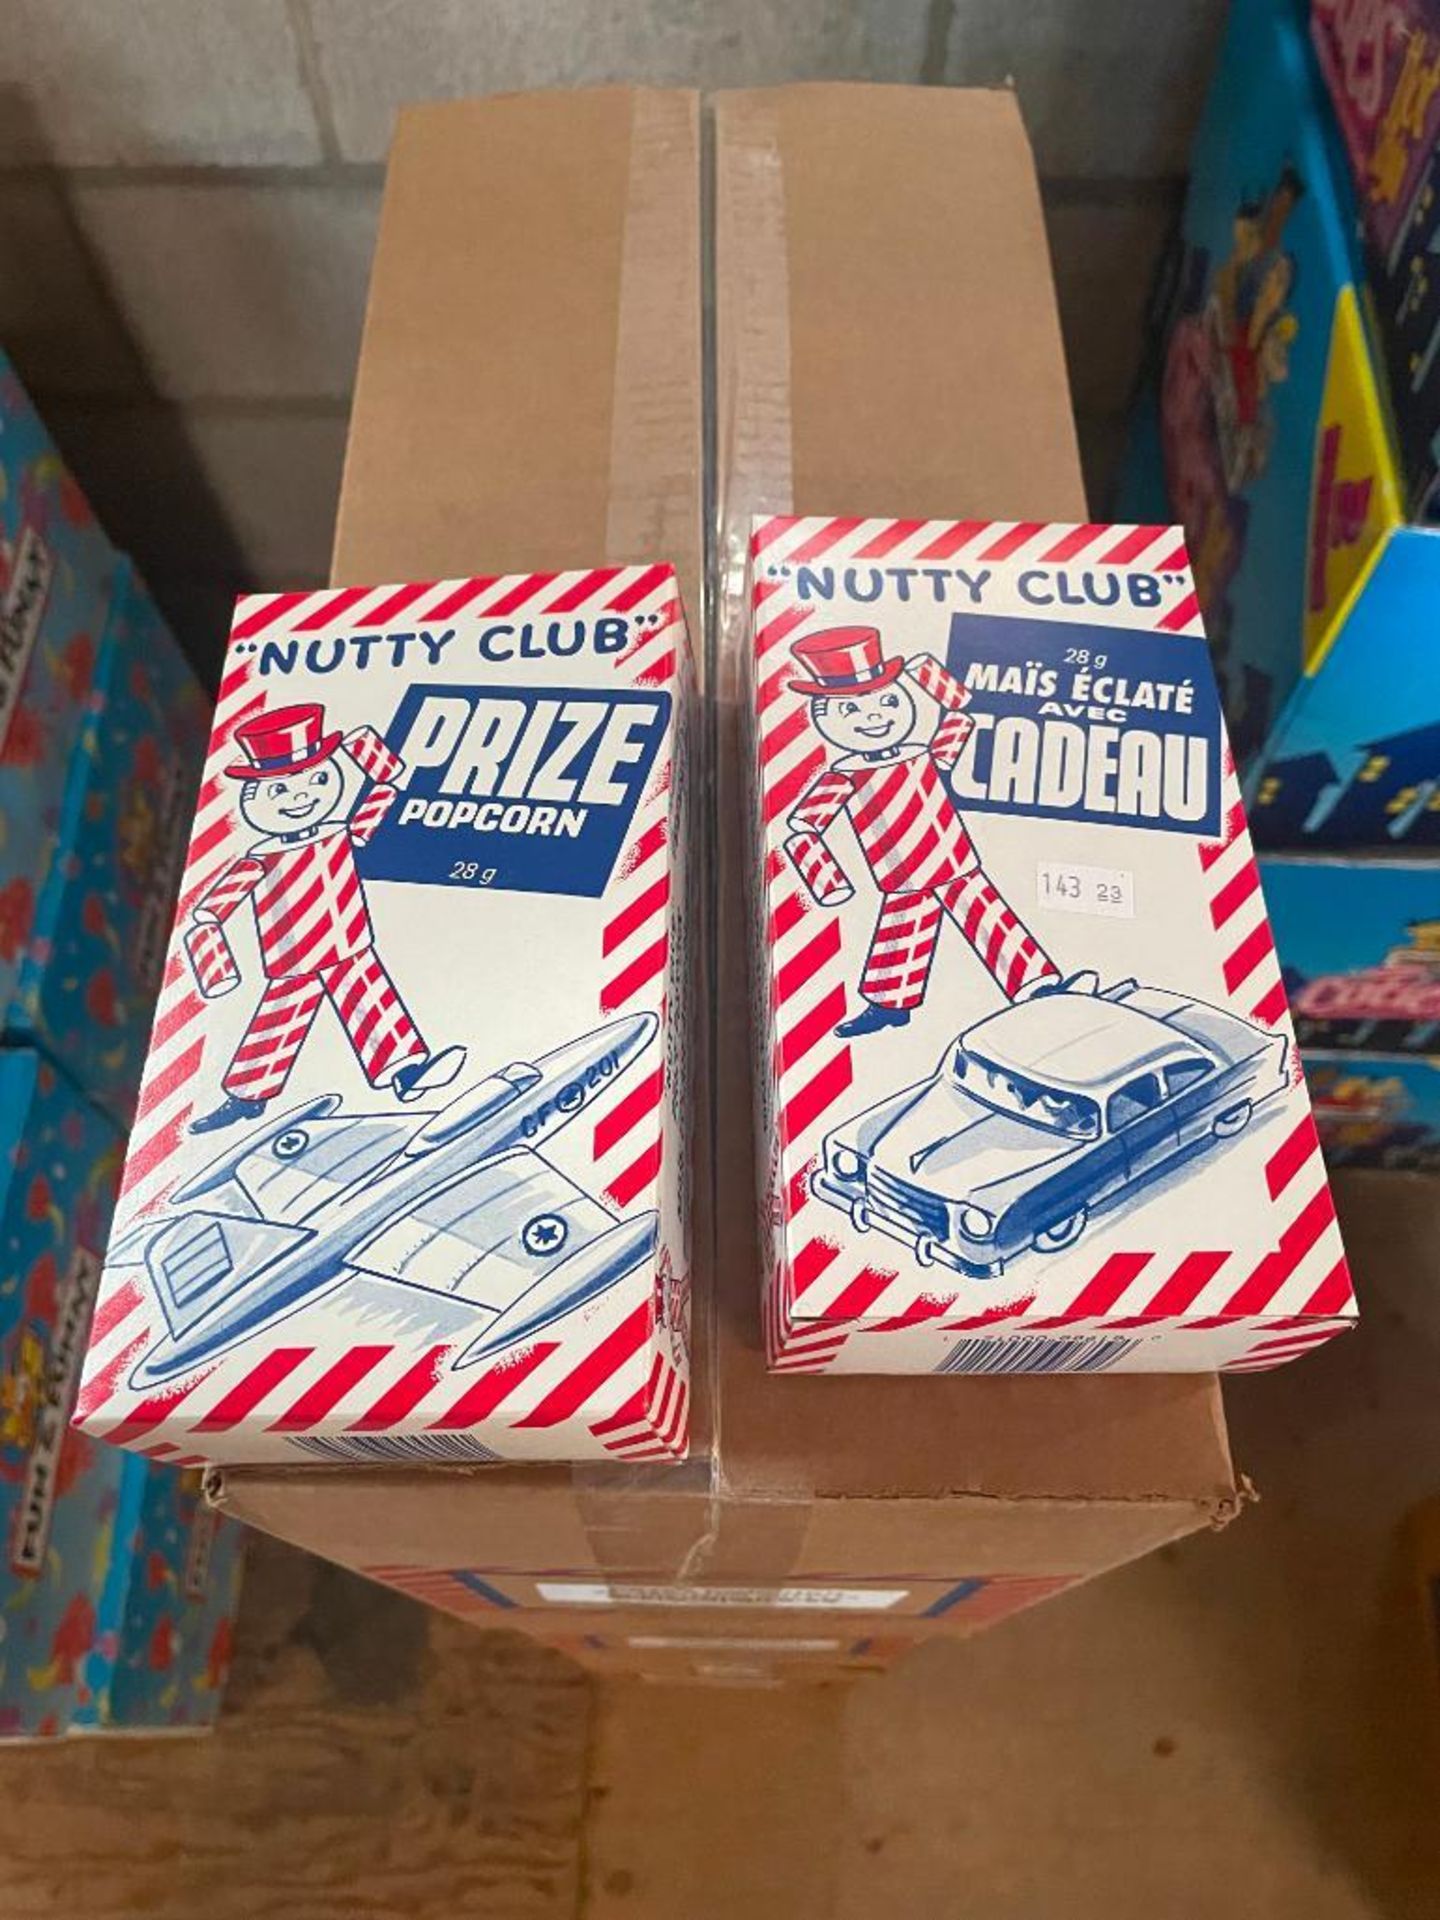 (3) BOXES OF NUTTY CLUB PRIZE POPCORN, 36/28G PER BOX - Image 2 of 3